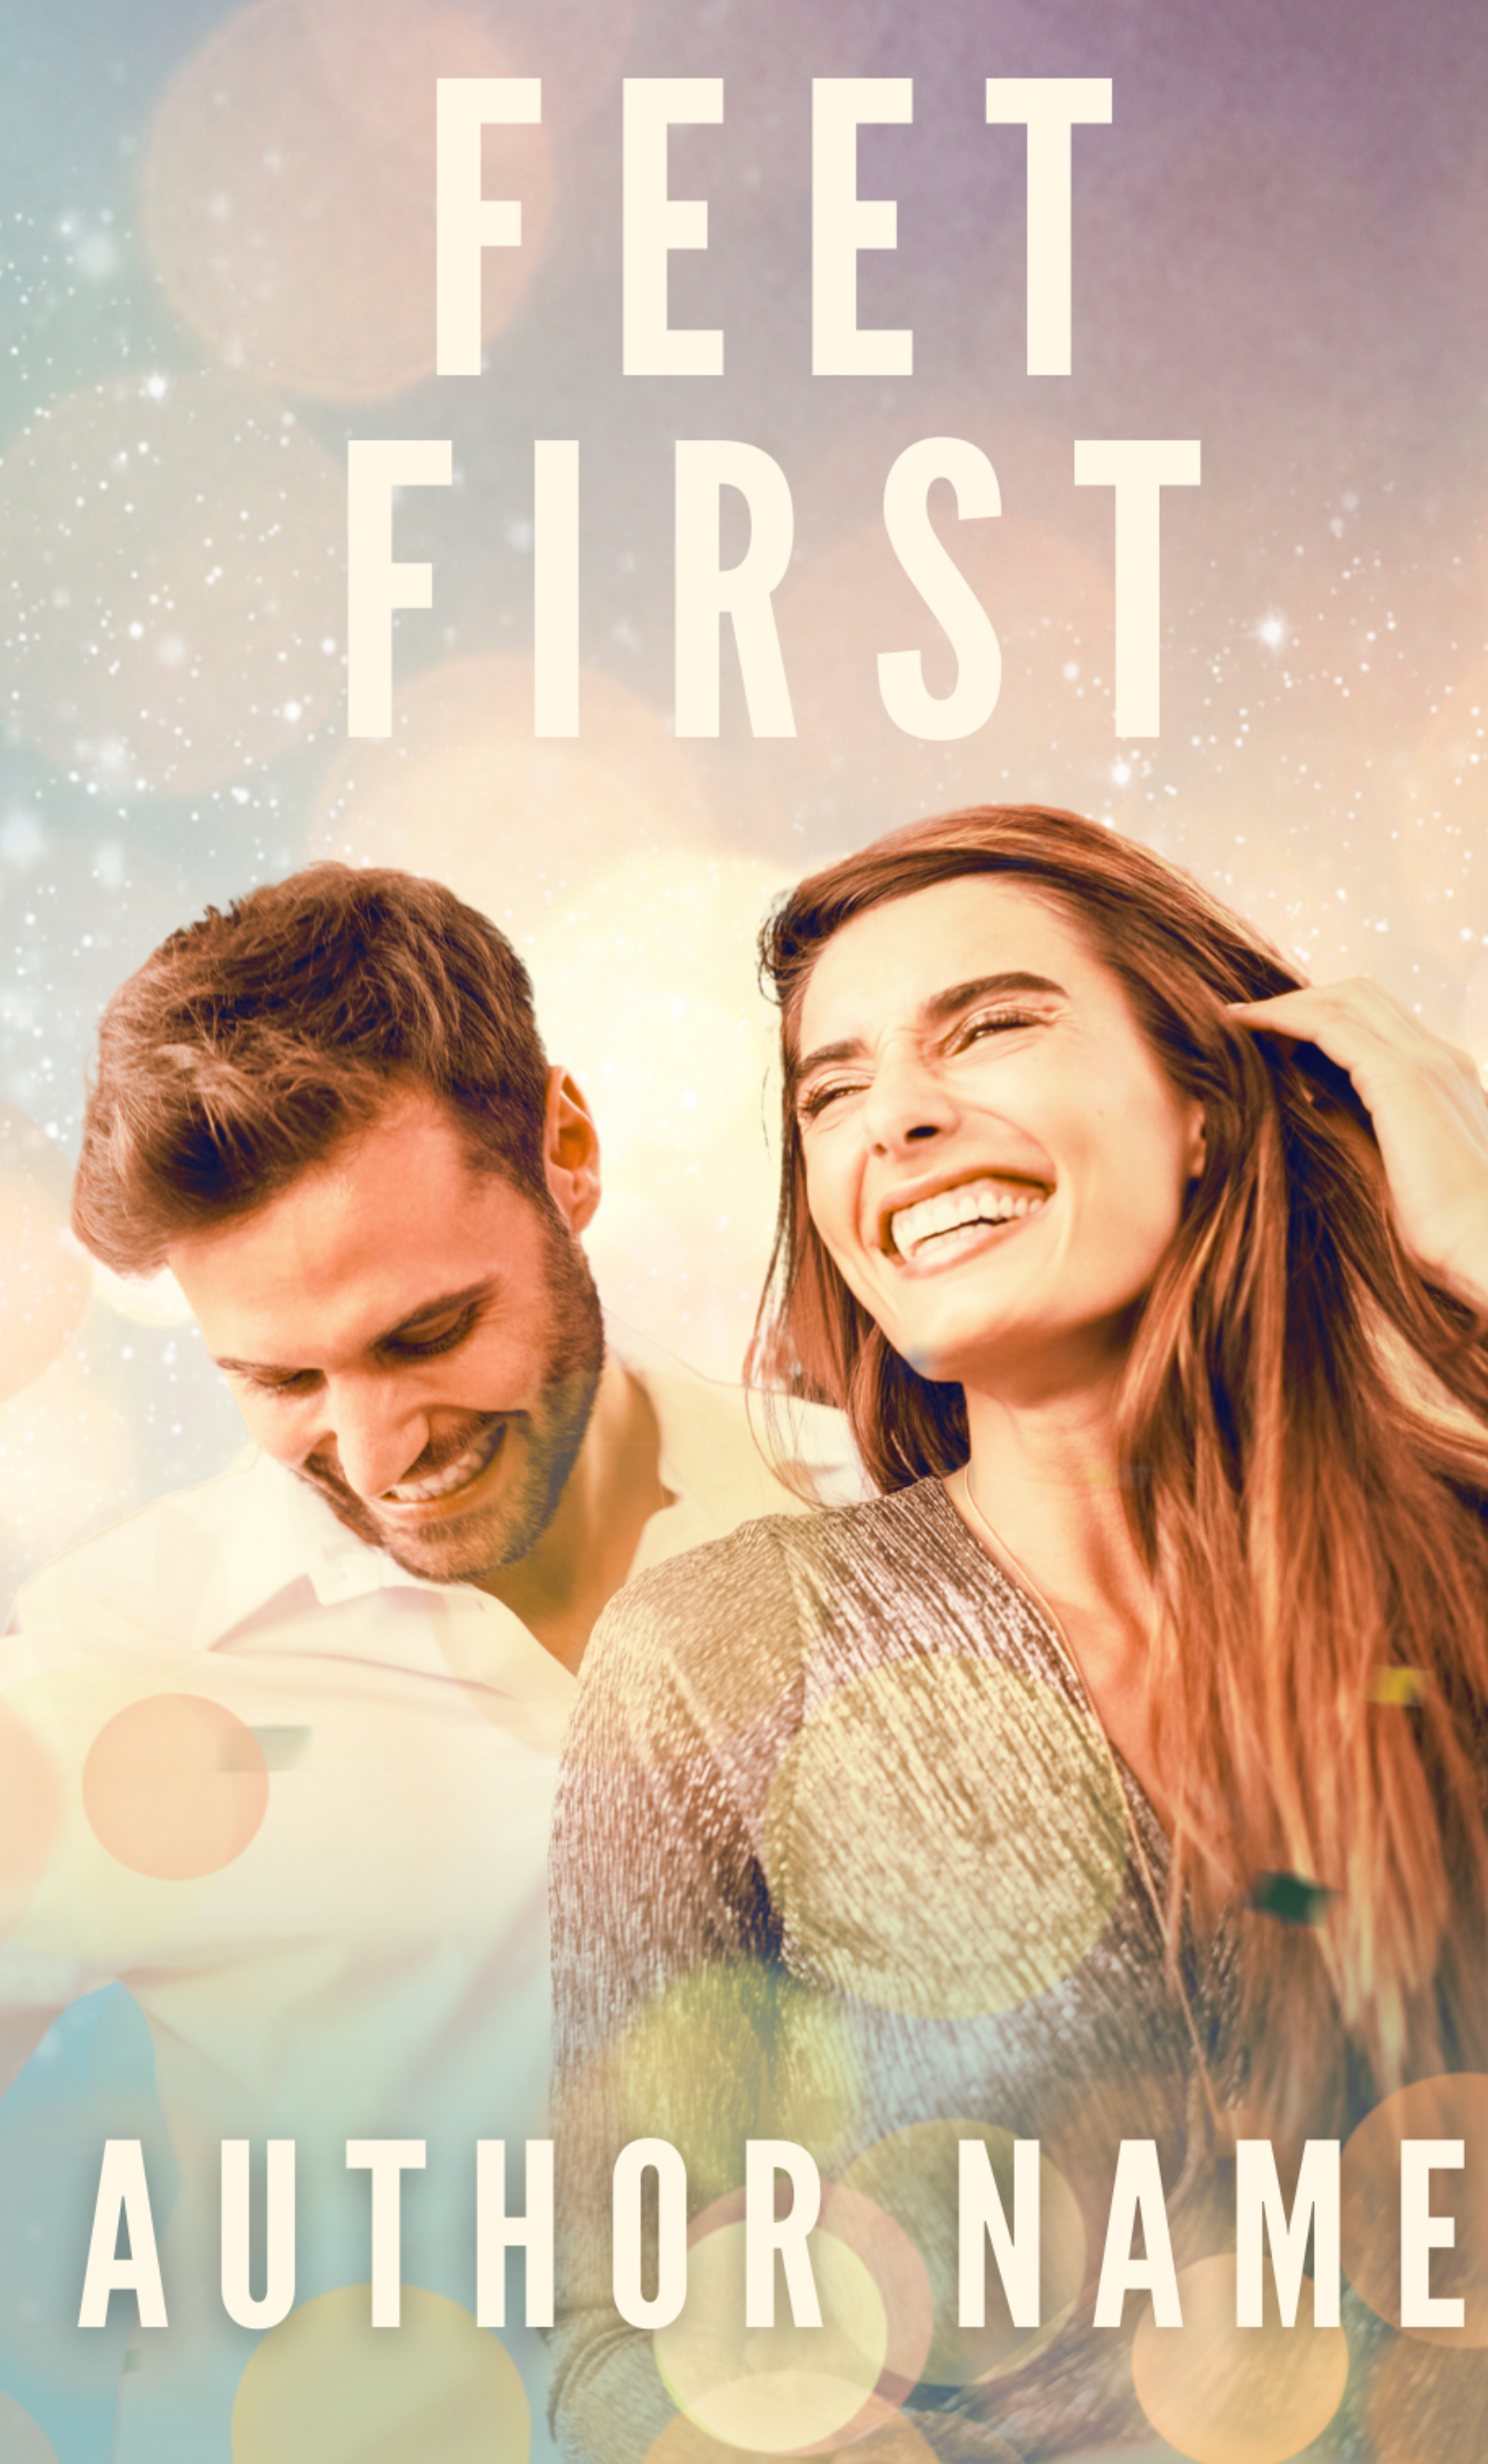 A book cover titled "Feet First," by Karen Barnett, features a smiling woman with long hair and a laughing man with short hair. The background is a blend of soft pastel colors and bokeh light effects, creating a dreamy atmosphere. "Author Name" is displayed at the bottom of the cover. BookSelf Book Cover Design & Premade Book Covers